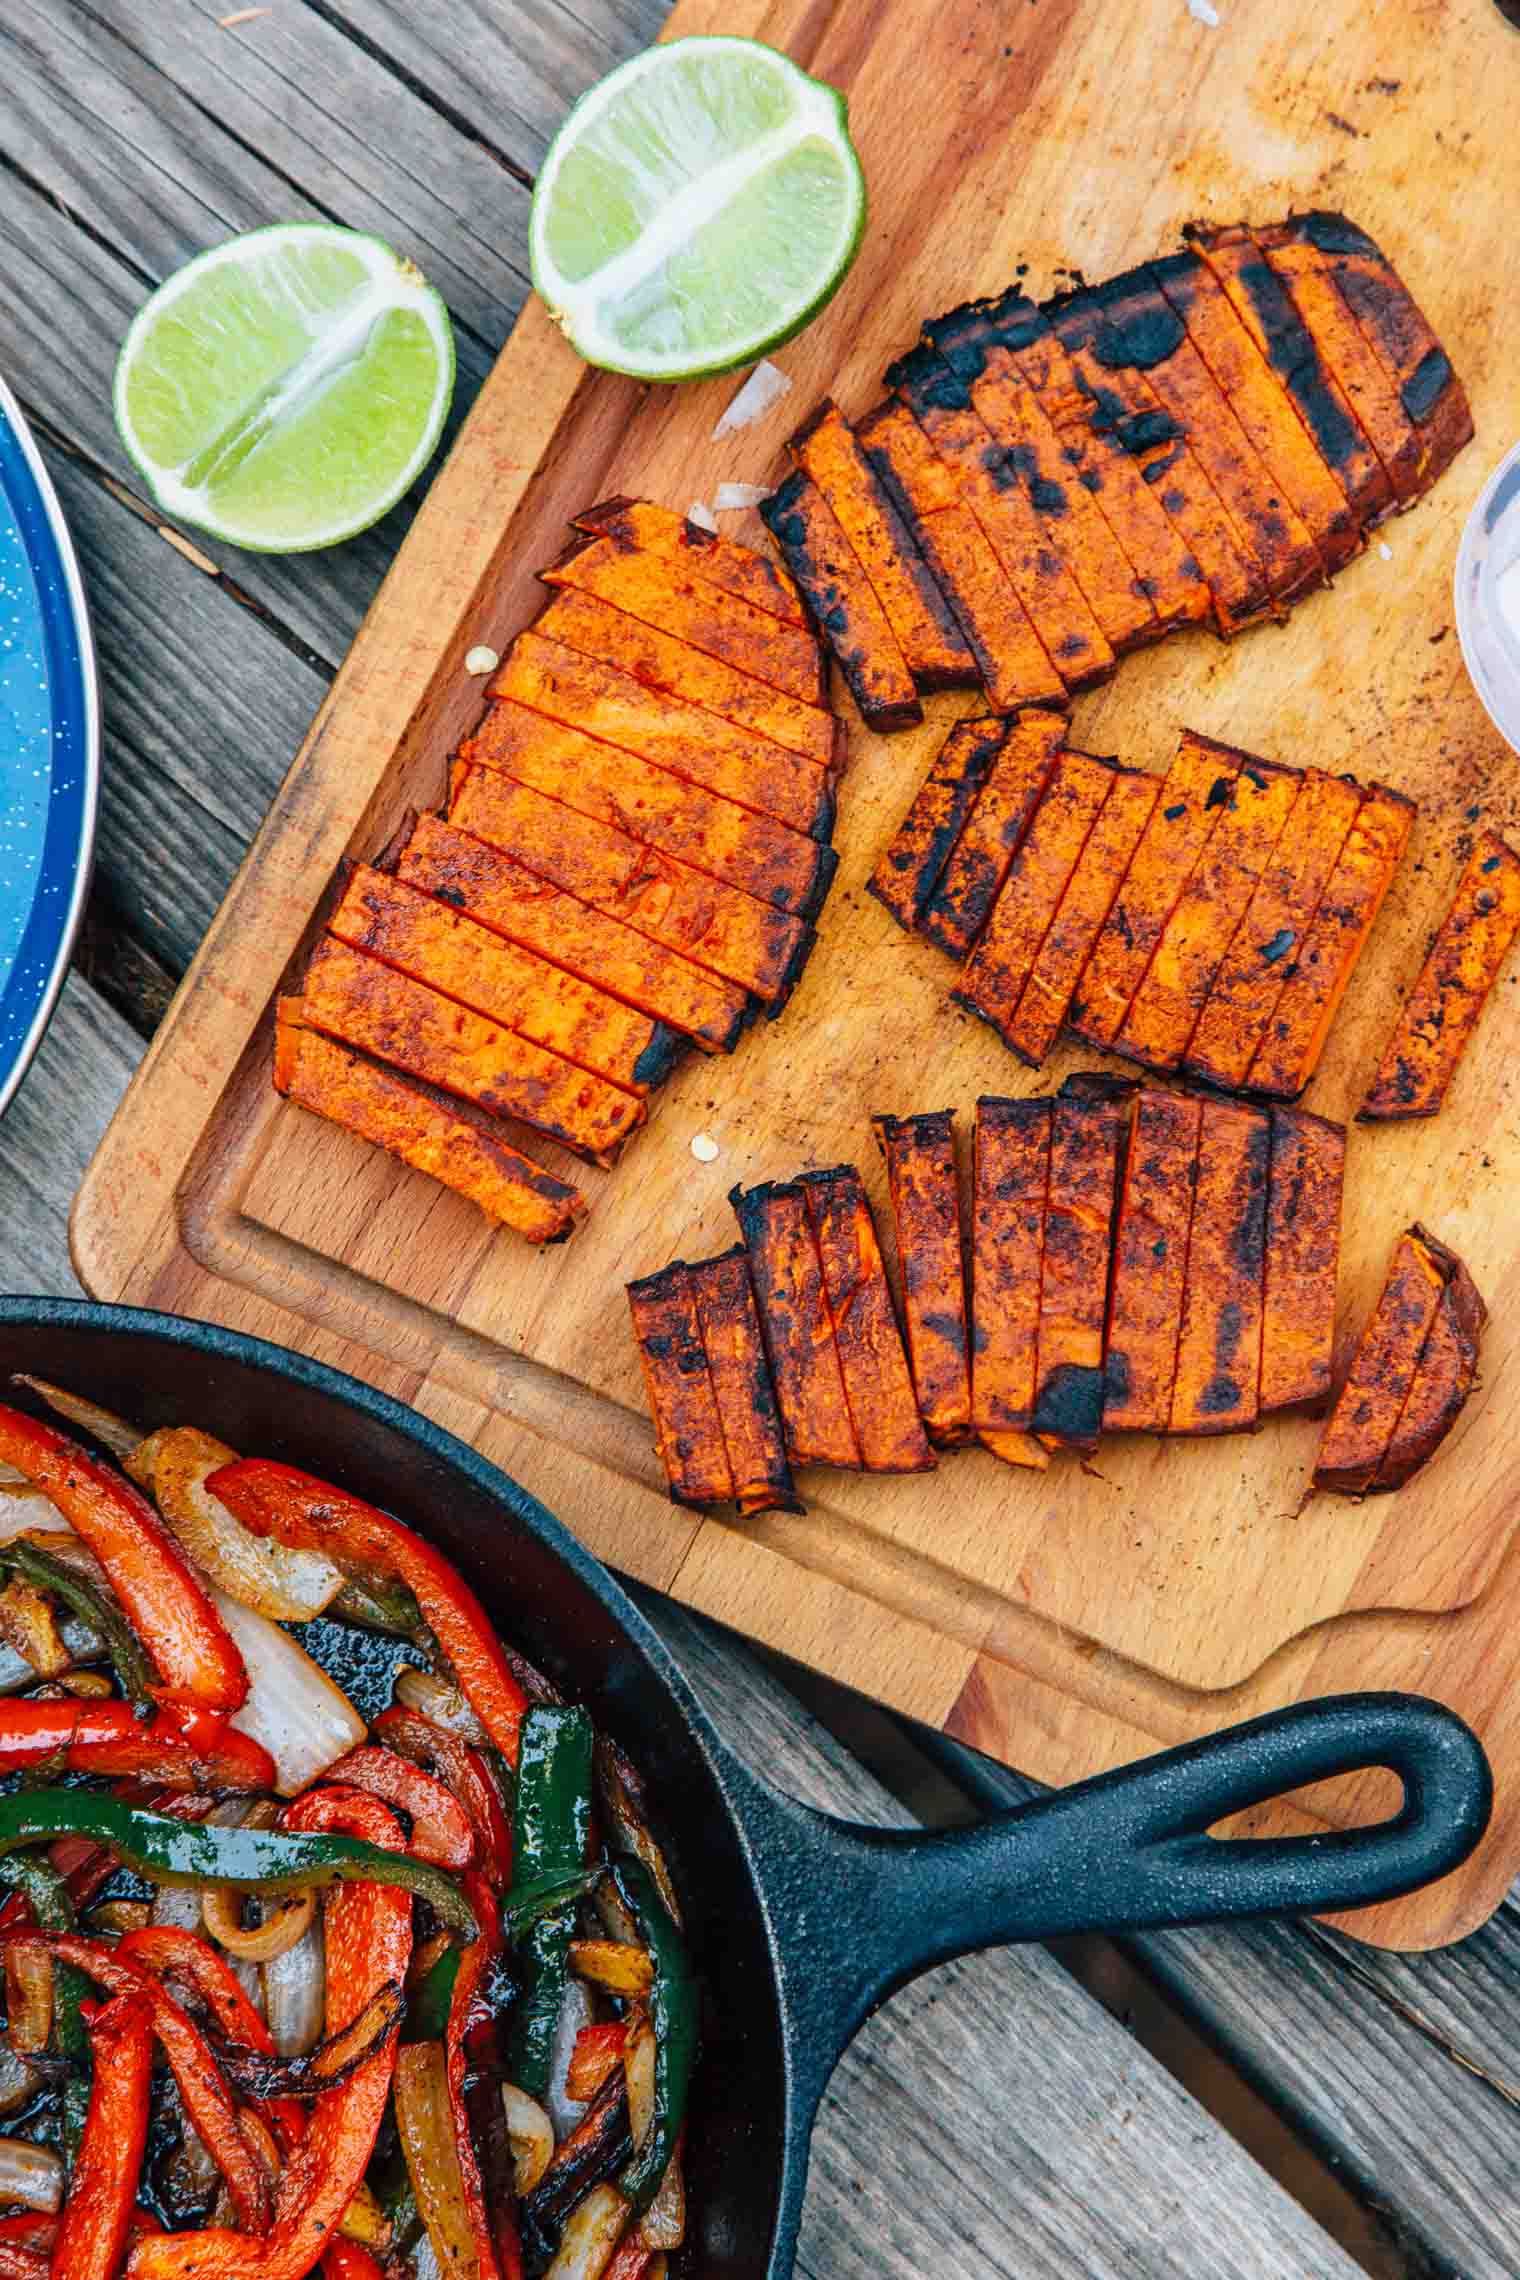 Grilled sweet potatoes on a wooden cutting board next to a cast iron skillet